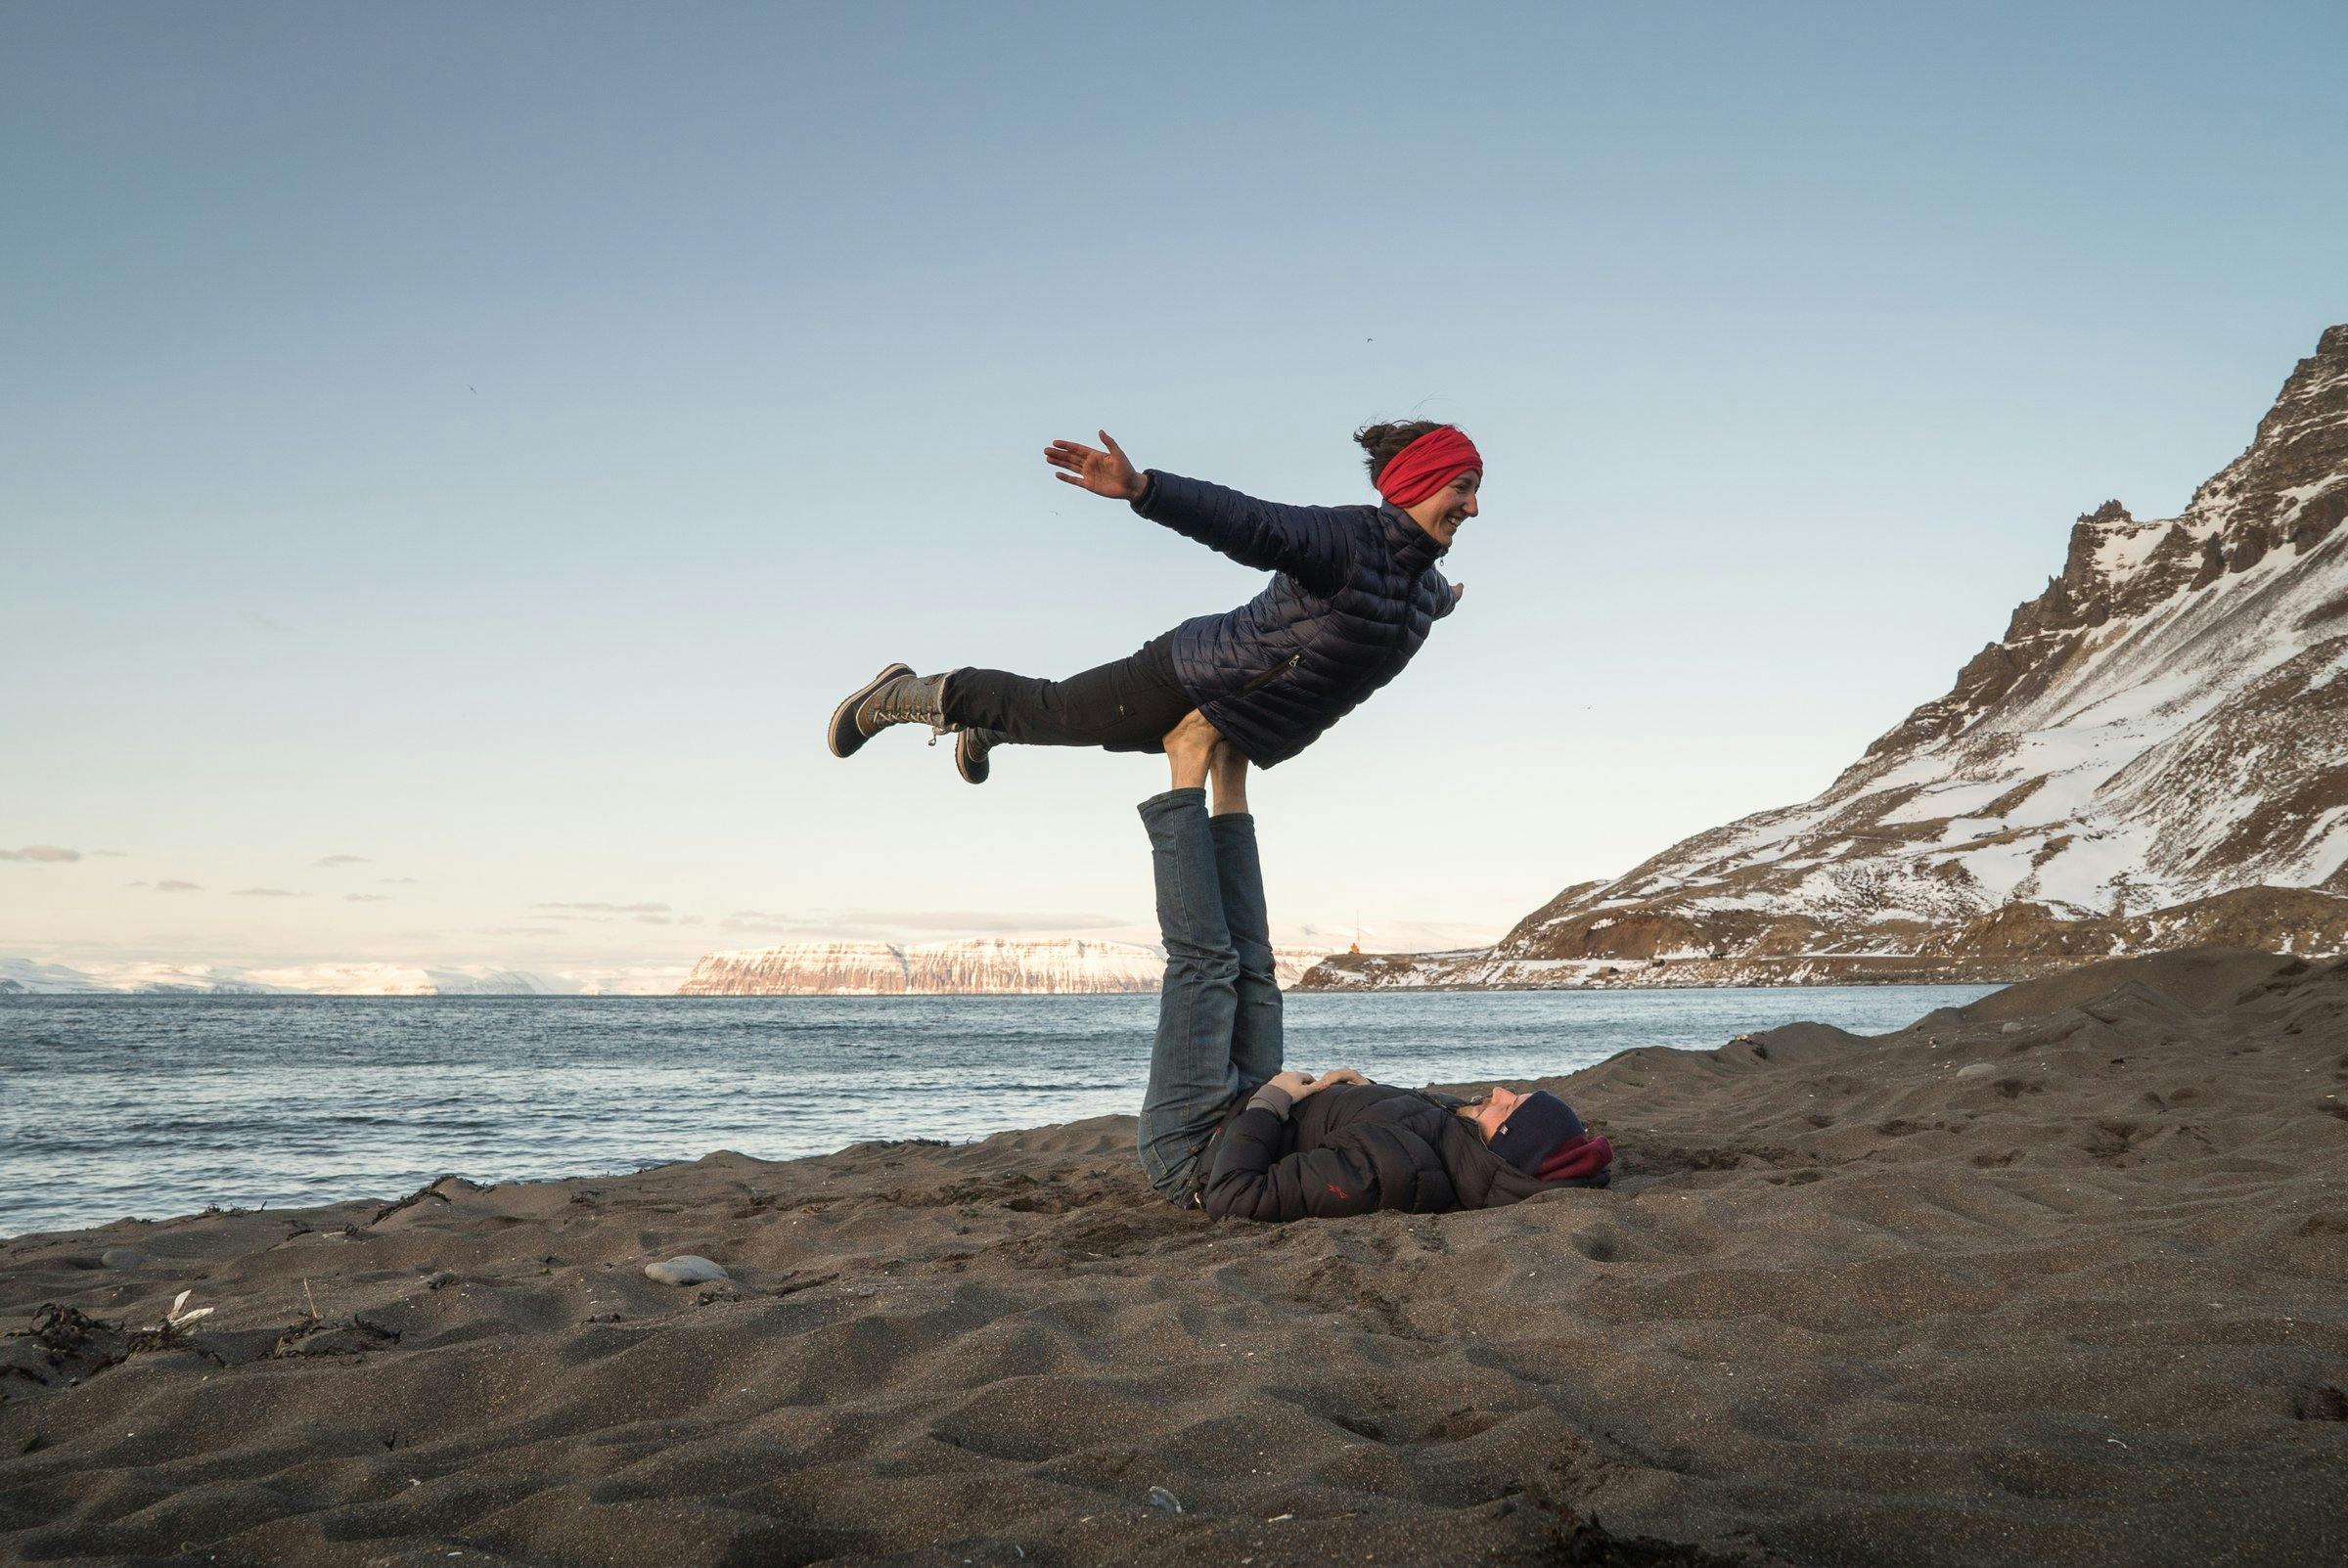 A couple does Yoga on a black sand beach. He is lying on his back and she is balancing on his feet. Mountains with snow in the background.